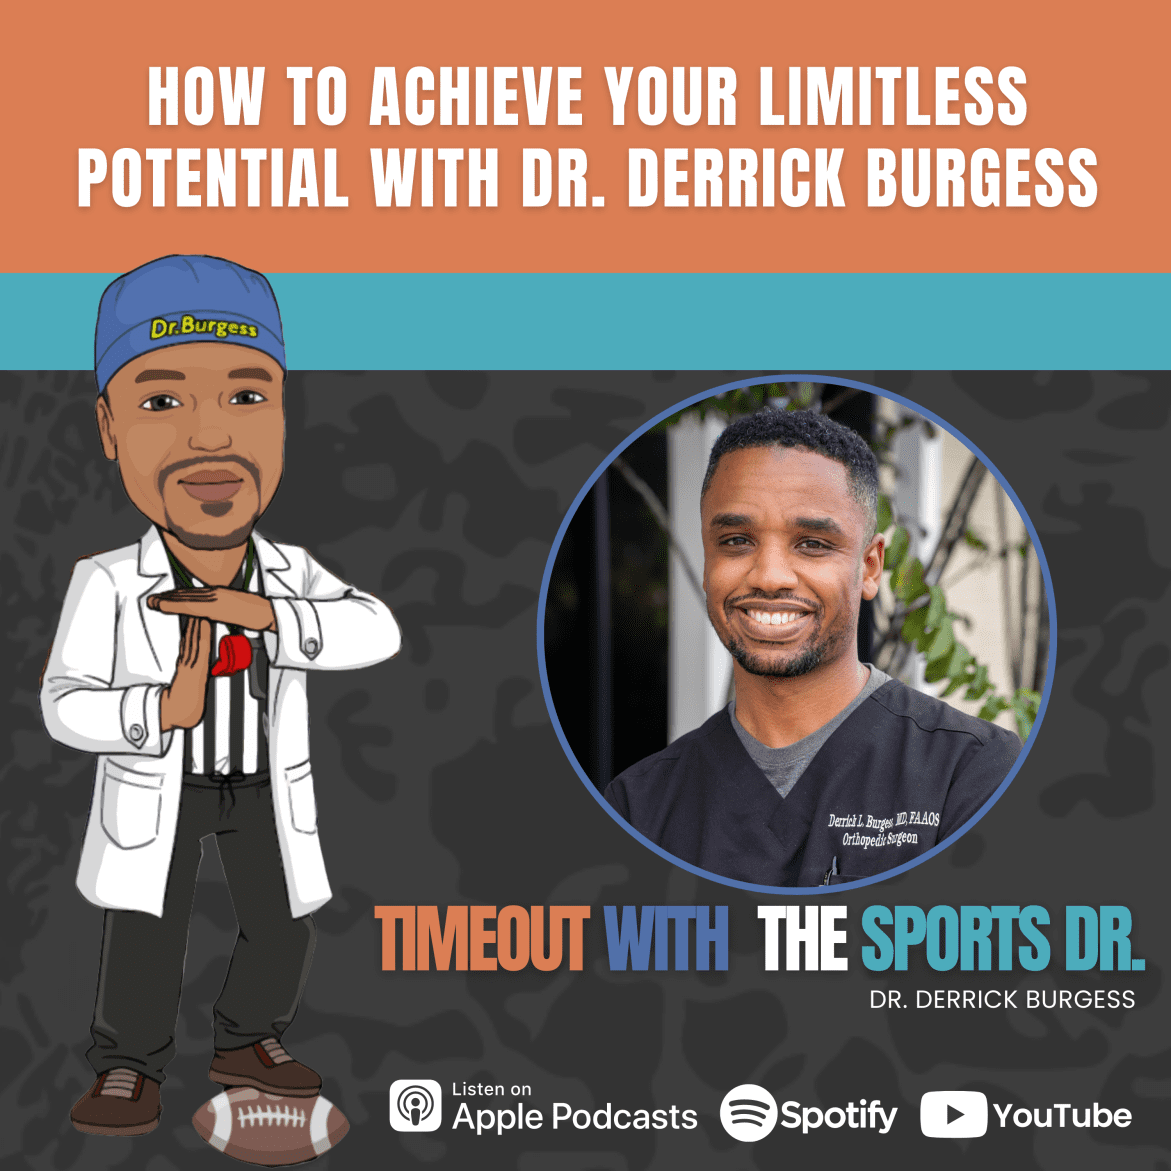 Black Podcasting - How to Achieve Your Limitless Potential with Dr. Derrick Burgess